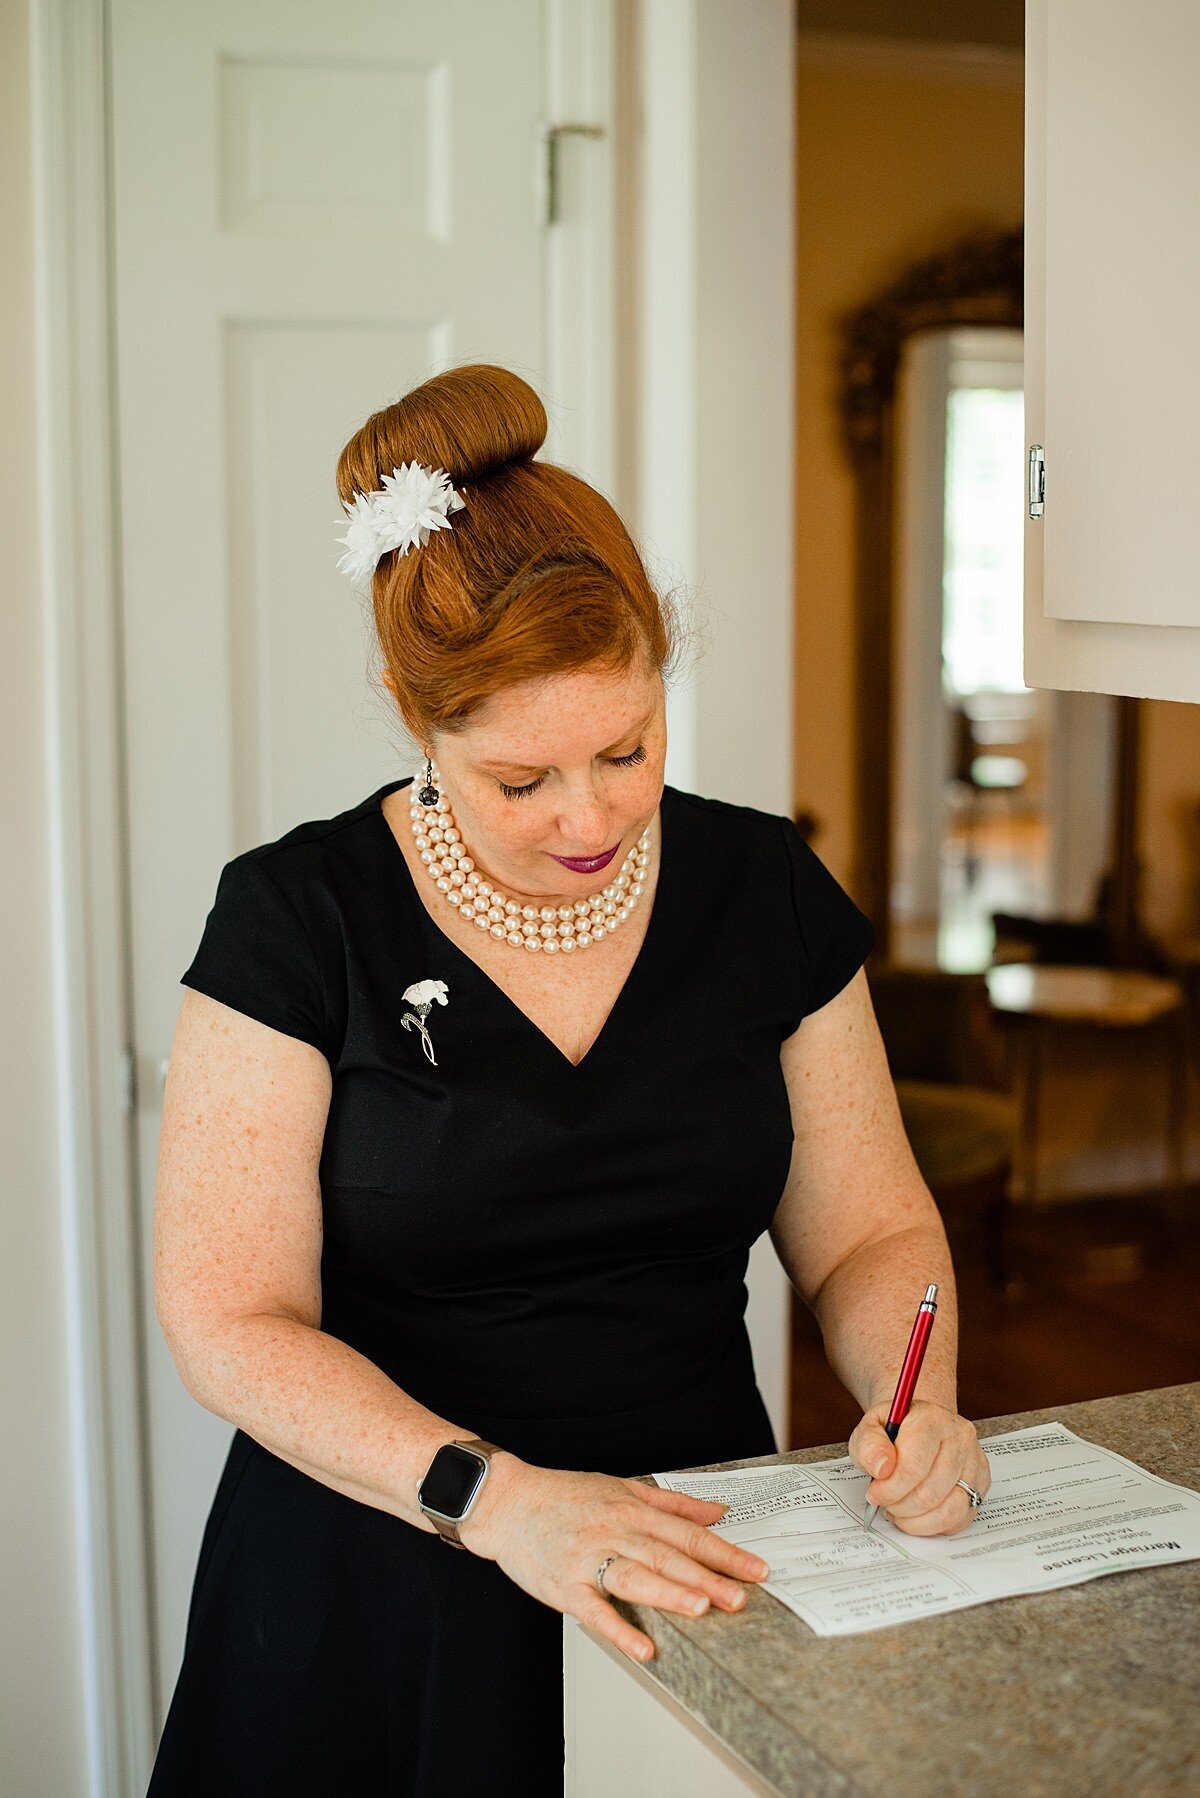 Raina, the wedding officiant signs the marriage license. The officiant is wearing a black dress with a v-neckline a three strand pearl necklace and a white and obsidian flower pin. She has her red hair swept up into a structured bun and small white flowers as accents.